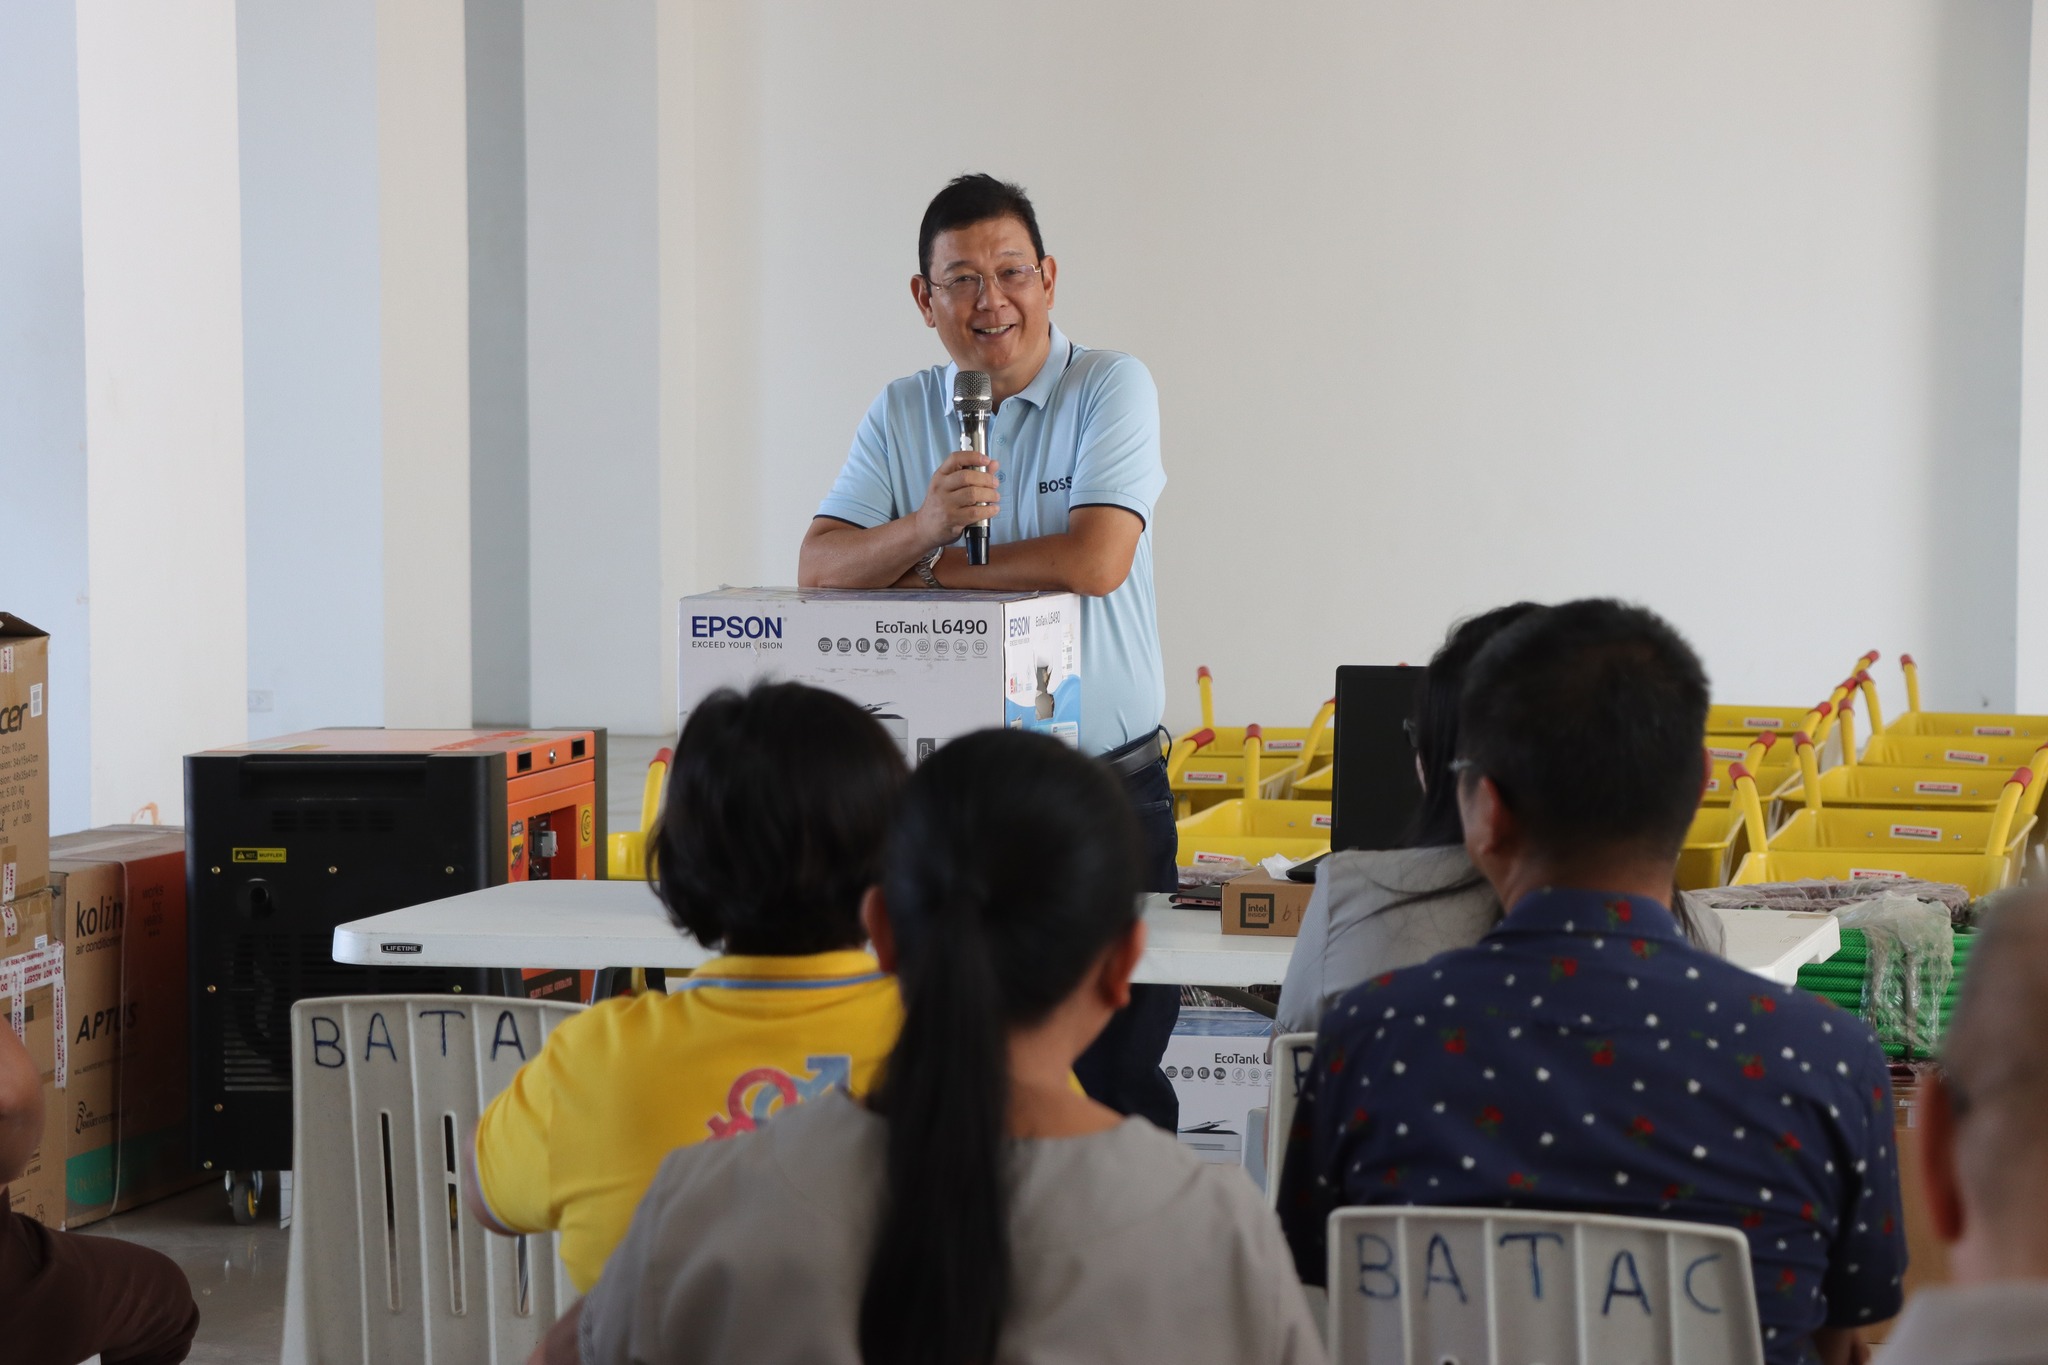 CITY GOVERNMENT SUSTAINS ITS SUPPORT TO PUBLIC SCHOOLS, DISTRIBUTES PLANTING MATERIALS, LAPTOPS AND OTHER EQUIPMENT ANEW